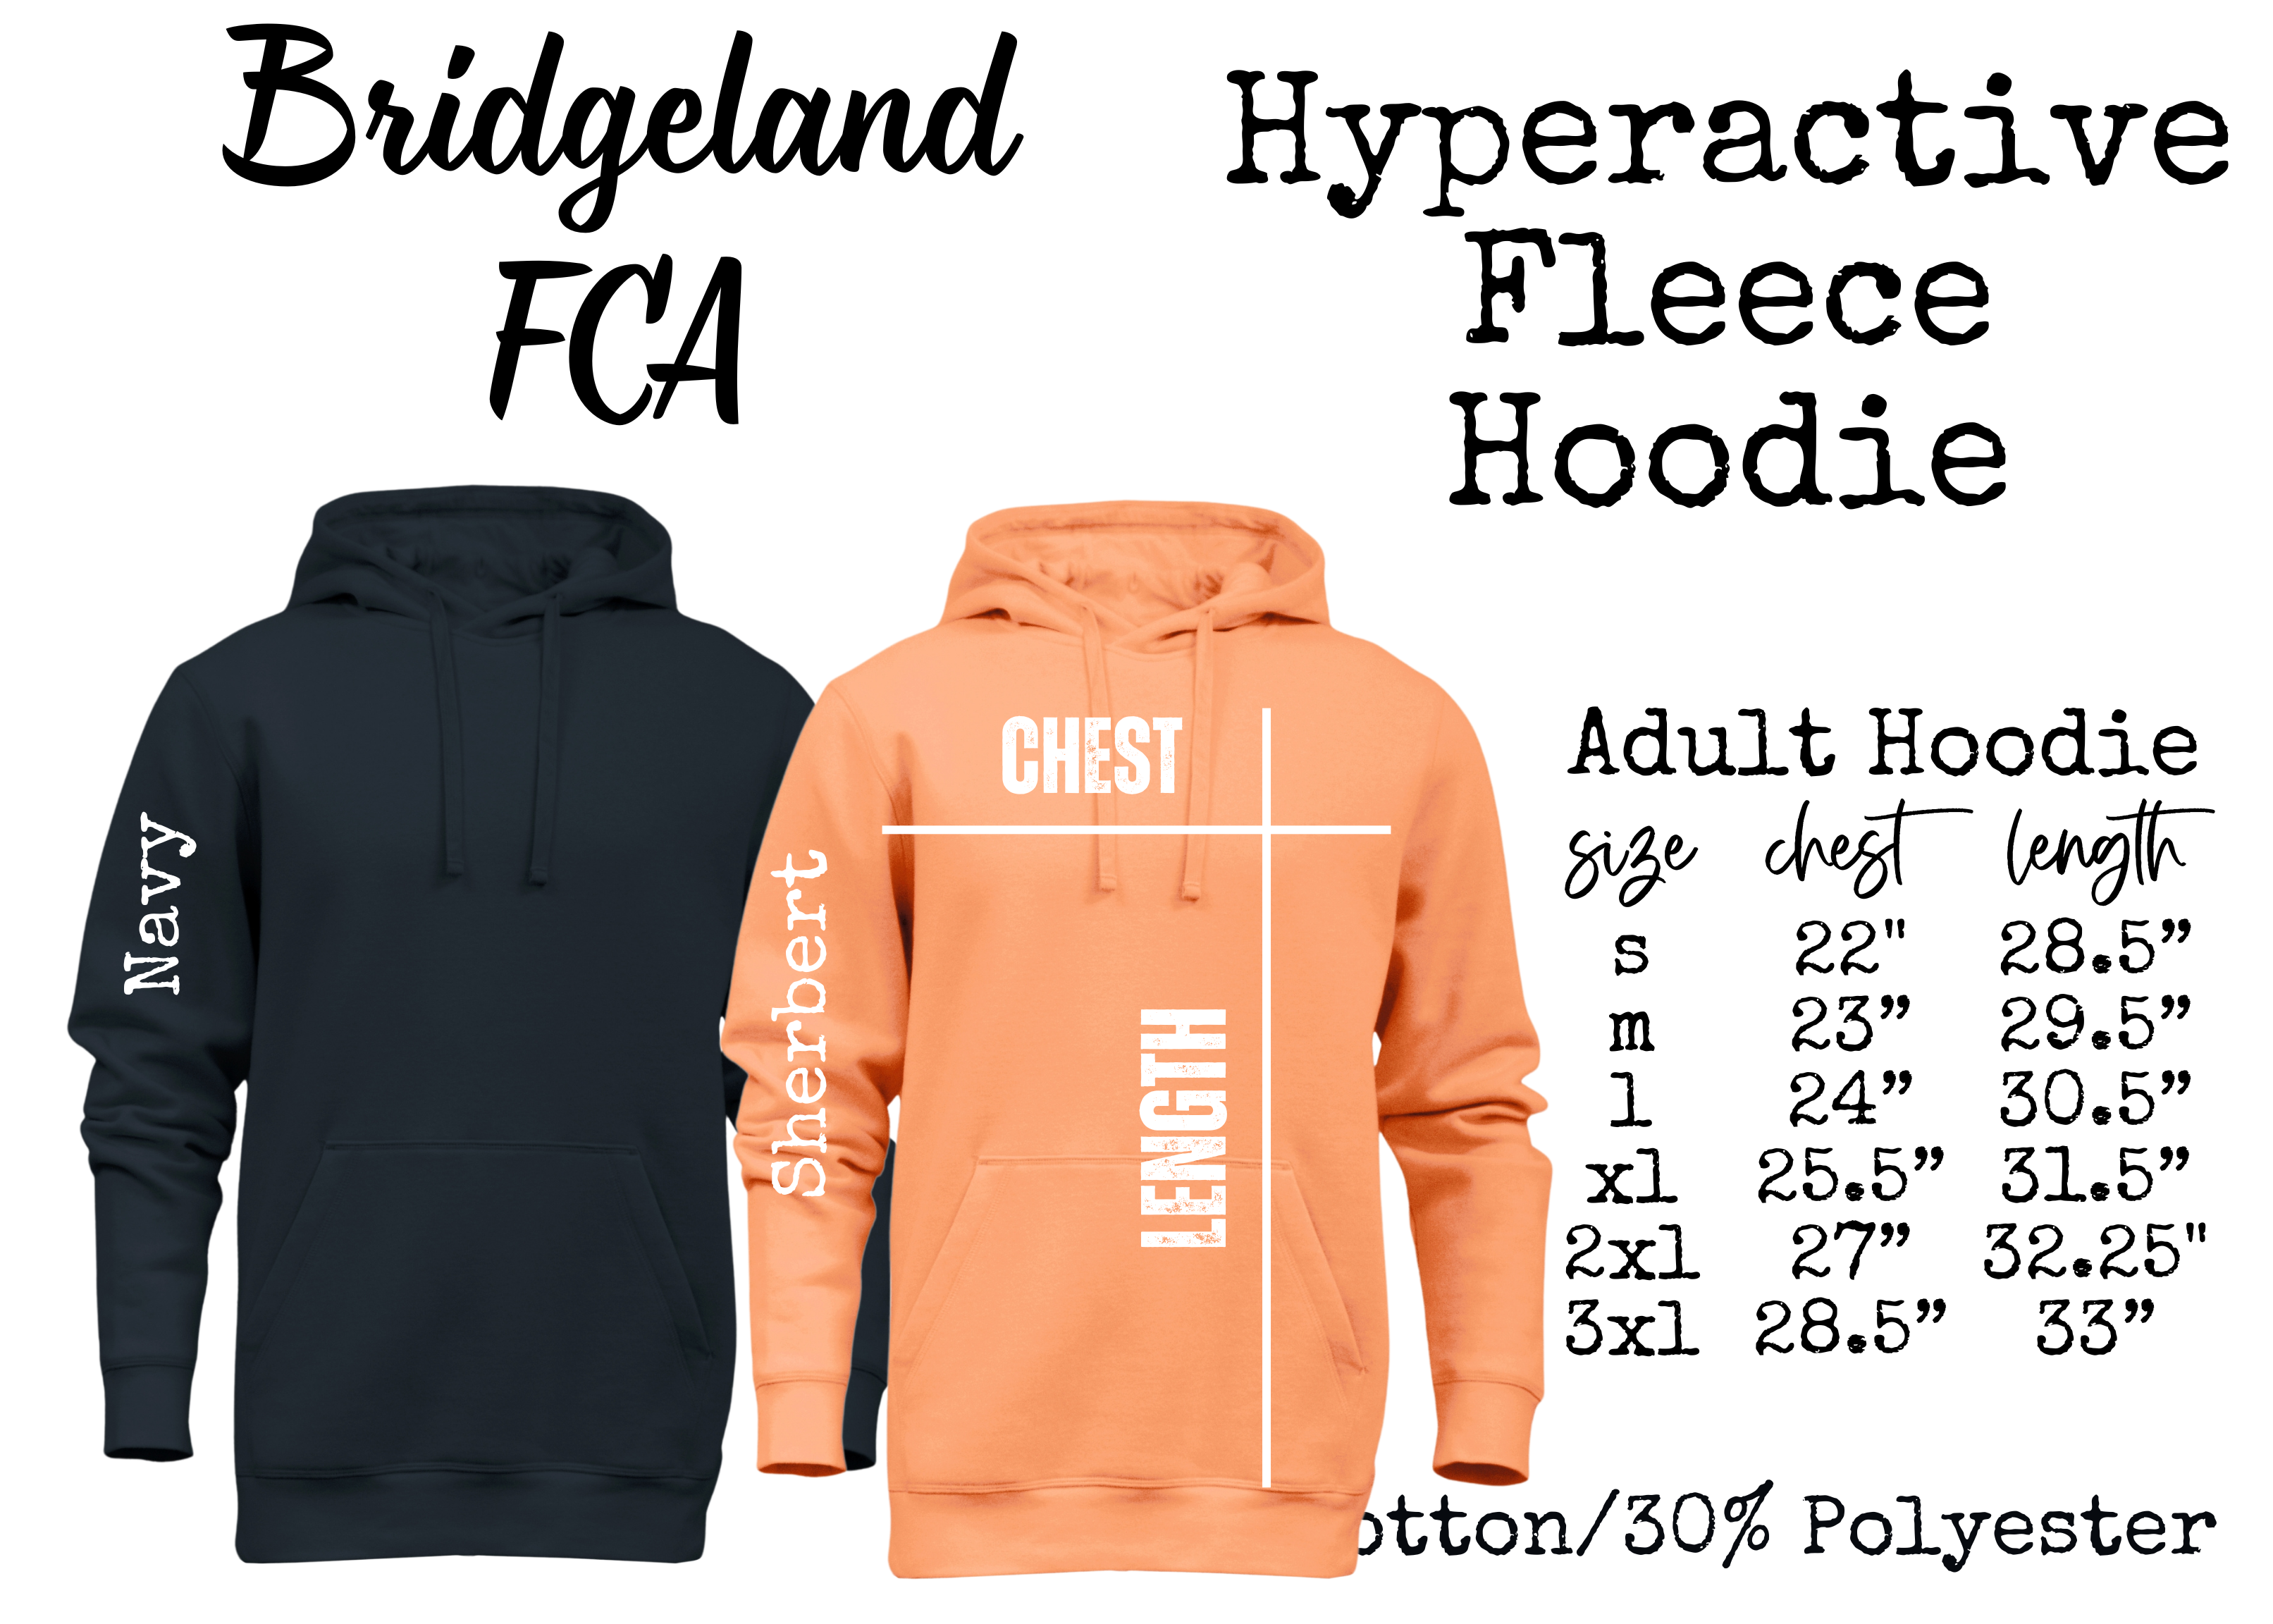 FCA Outlined Cotton Hoodie